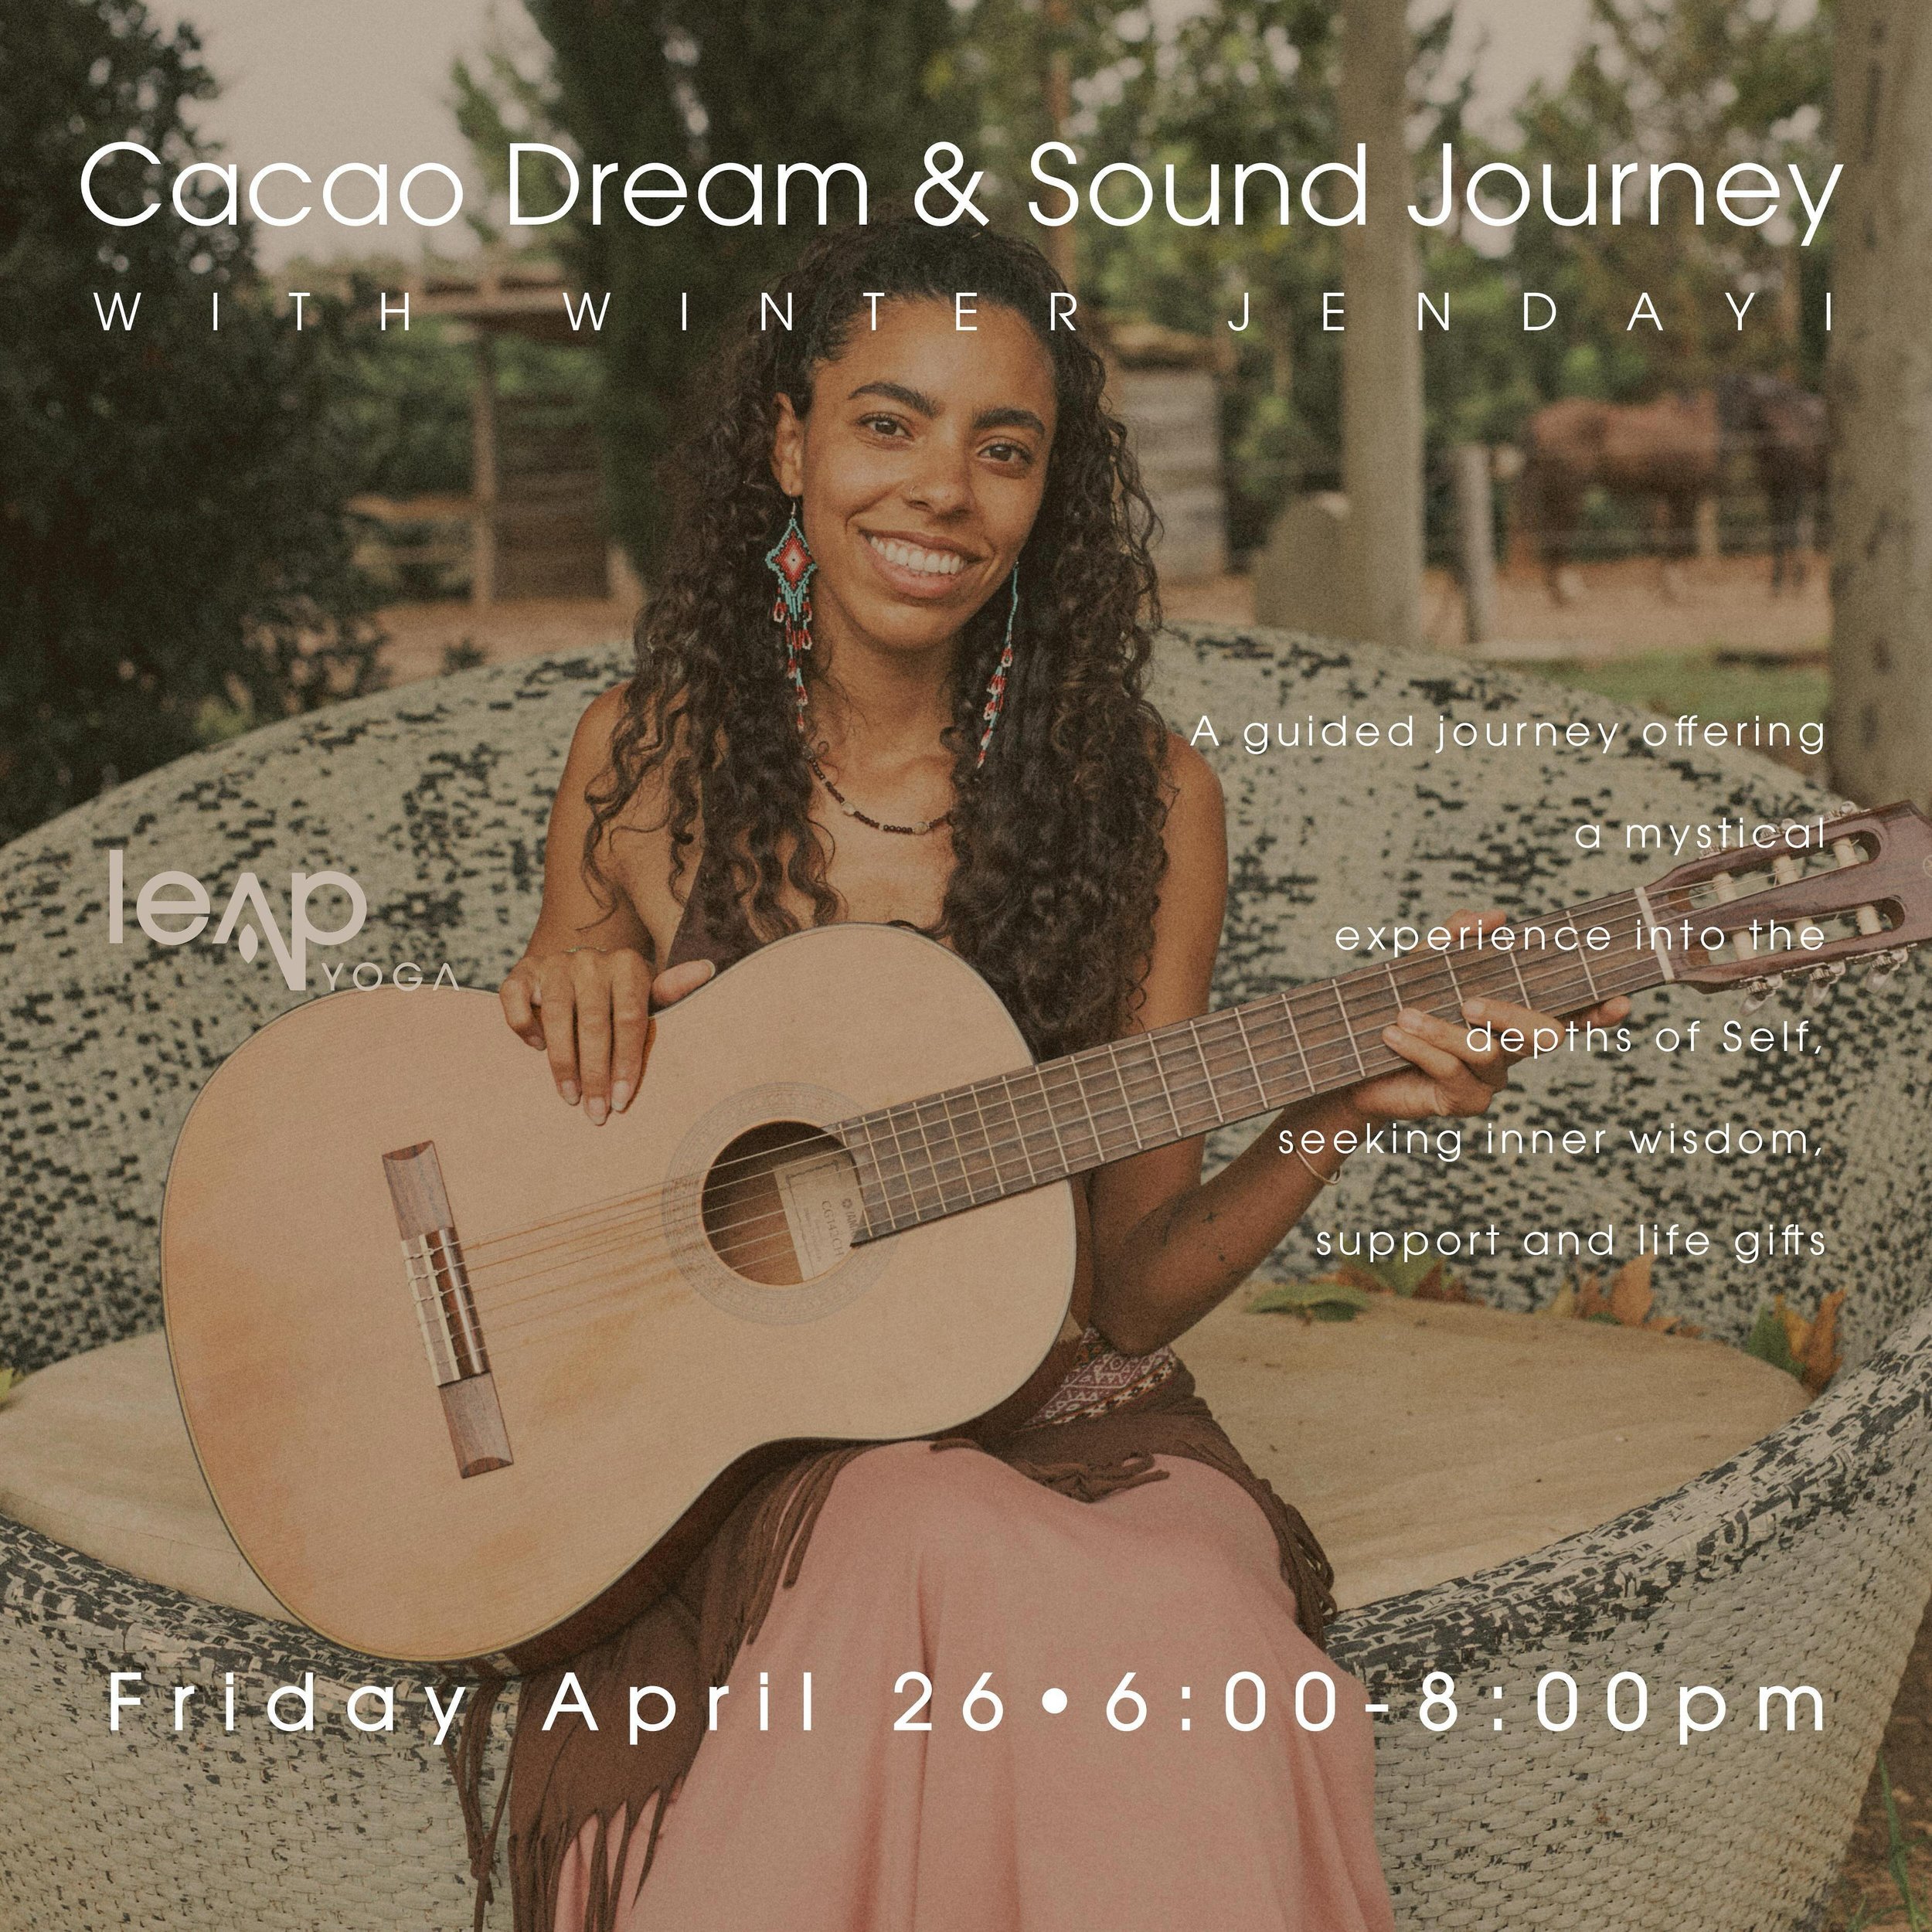 Cacao Dream &amp; Sound Journey ✨

Sacred Song | Purifying Plants | Seasonal Guidance

As Beltane approaches, I give thanks for the lessons of Spring thus far and all that I have been nurturing within. And within the threshold of this sacred day, I a